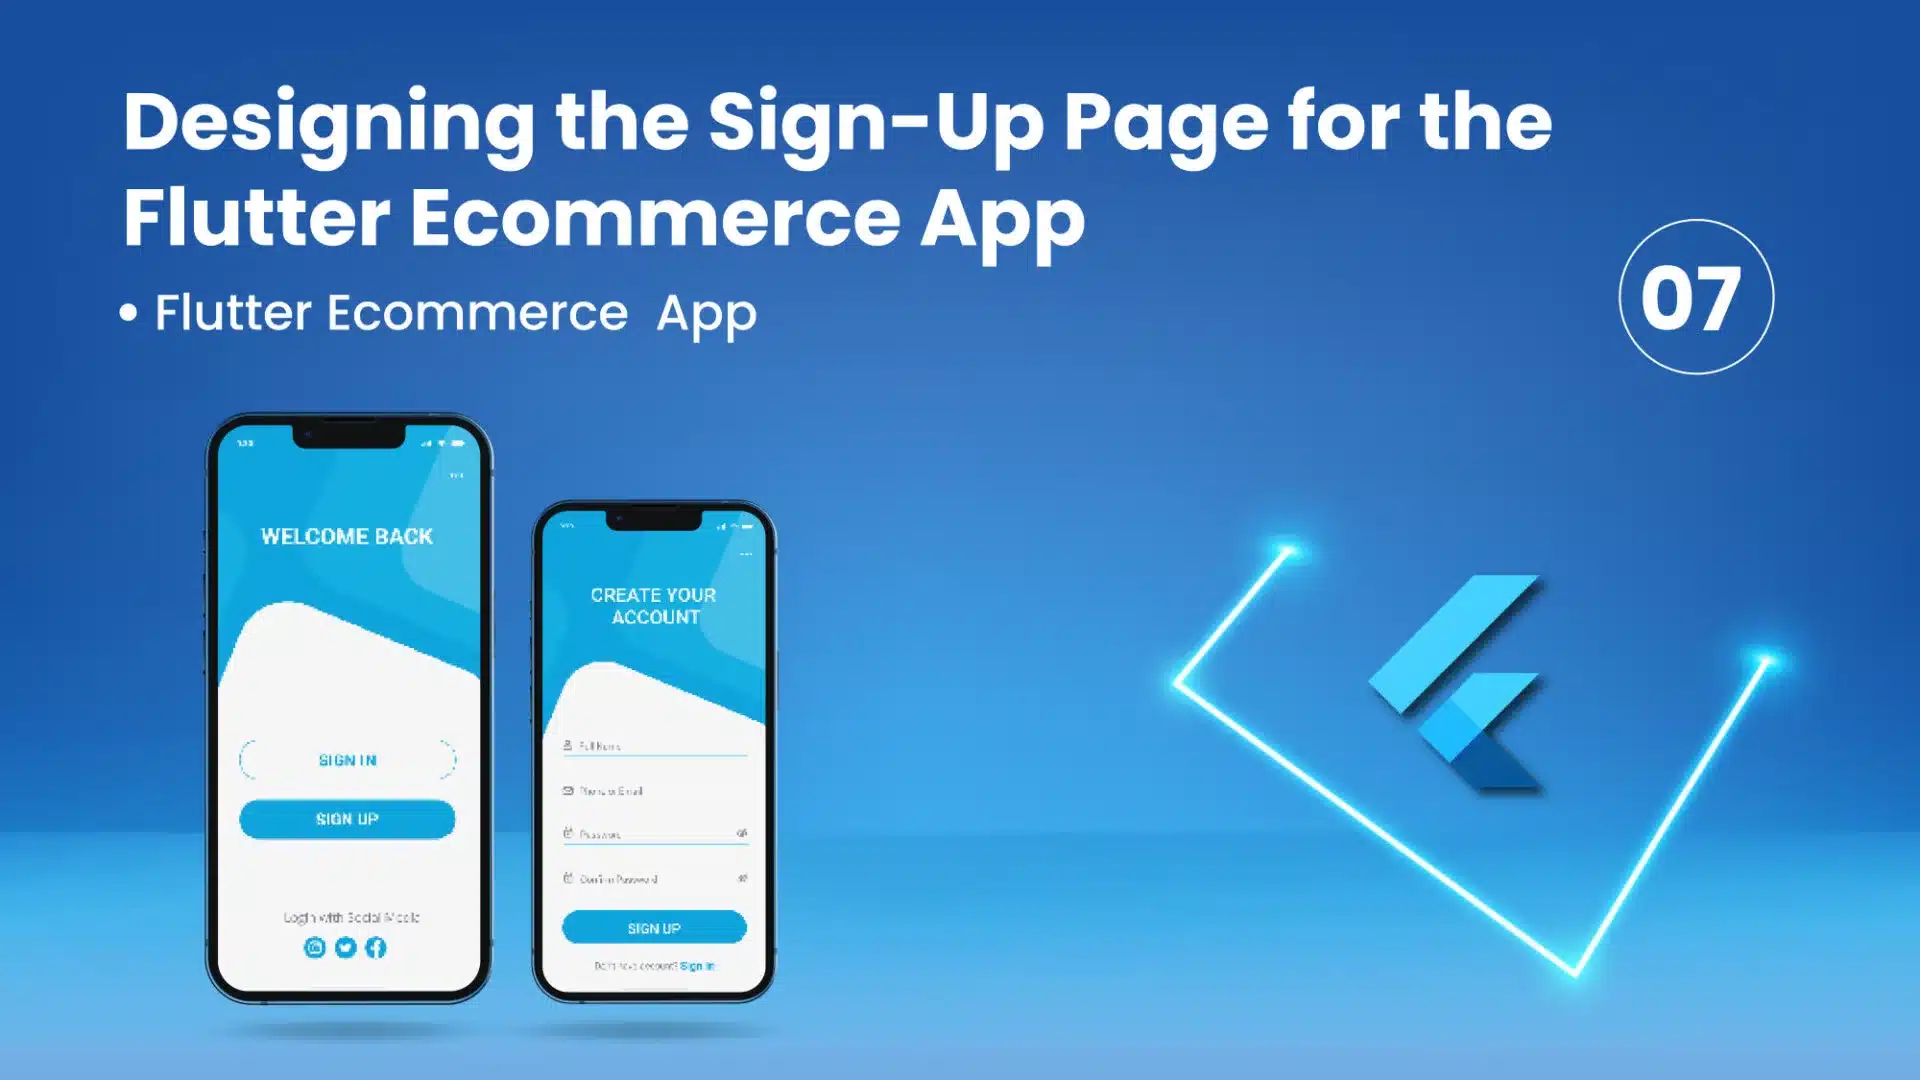 Designing the Sign-Up Page for the Flutter Ecommerce App